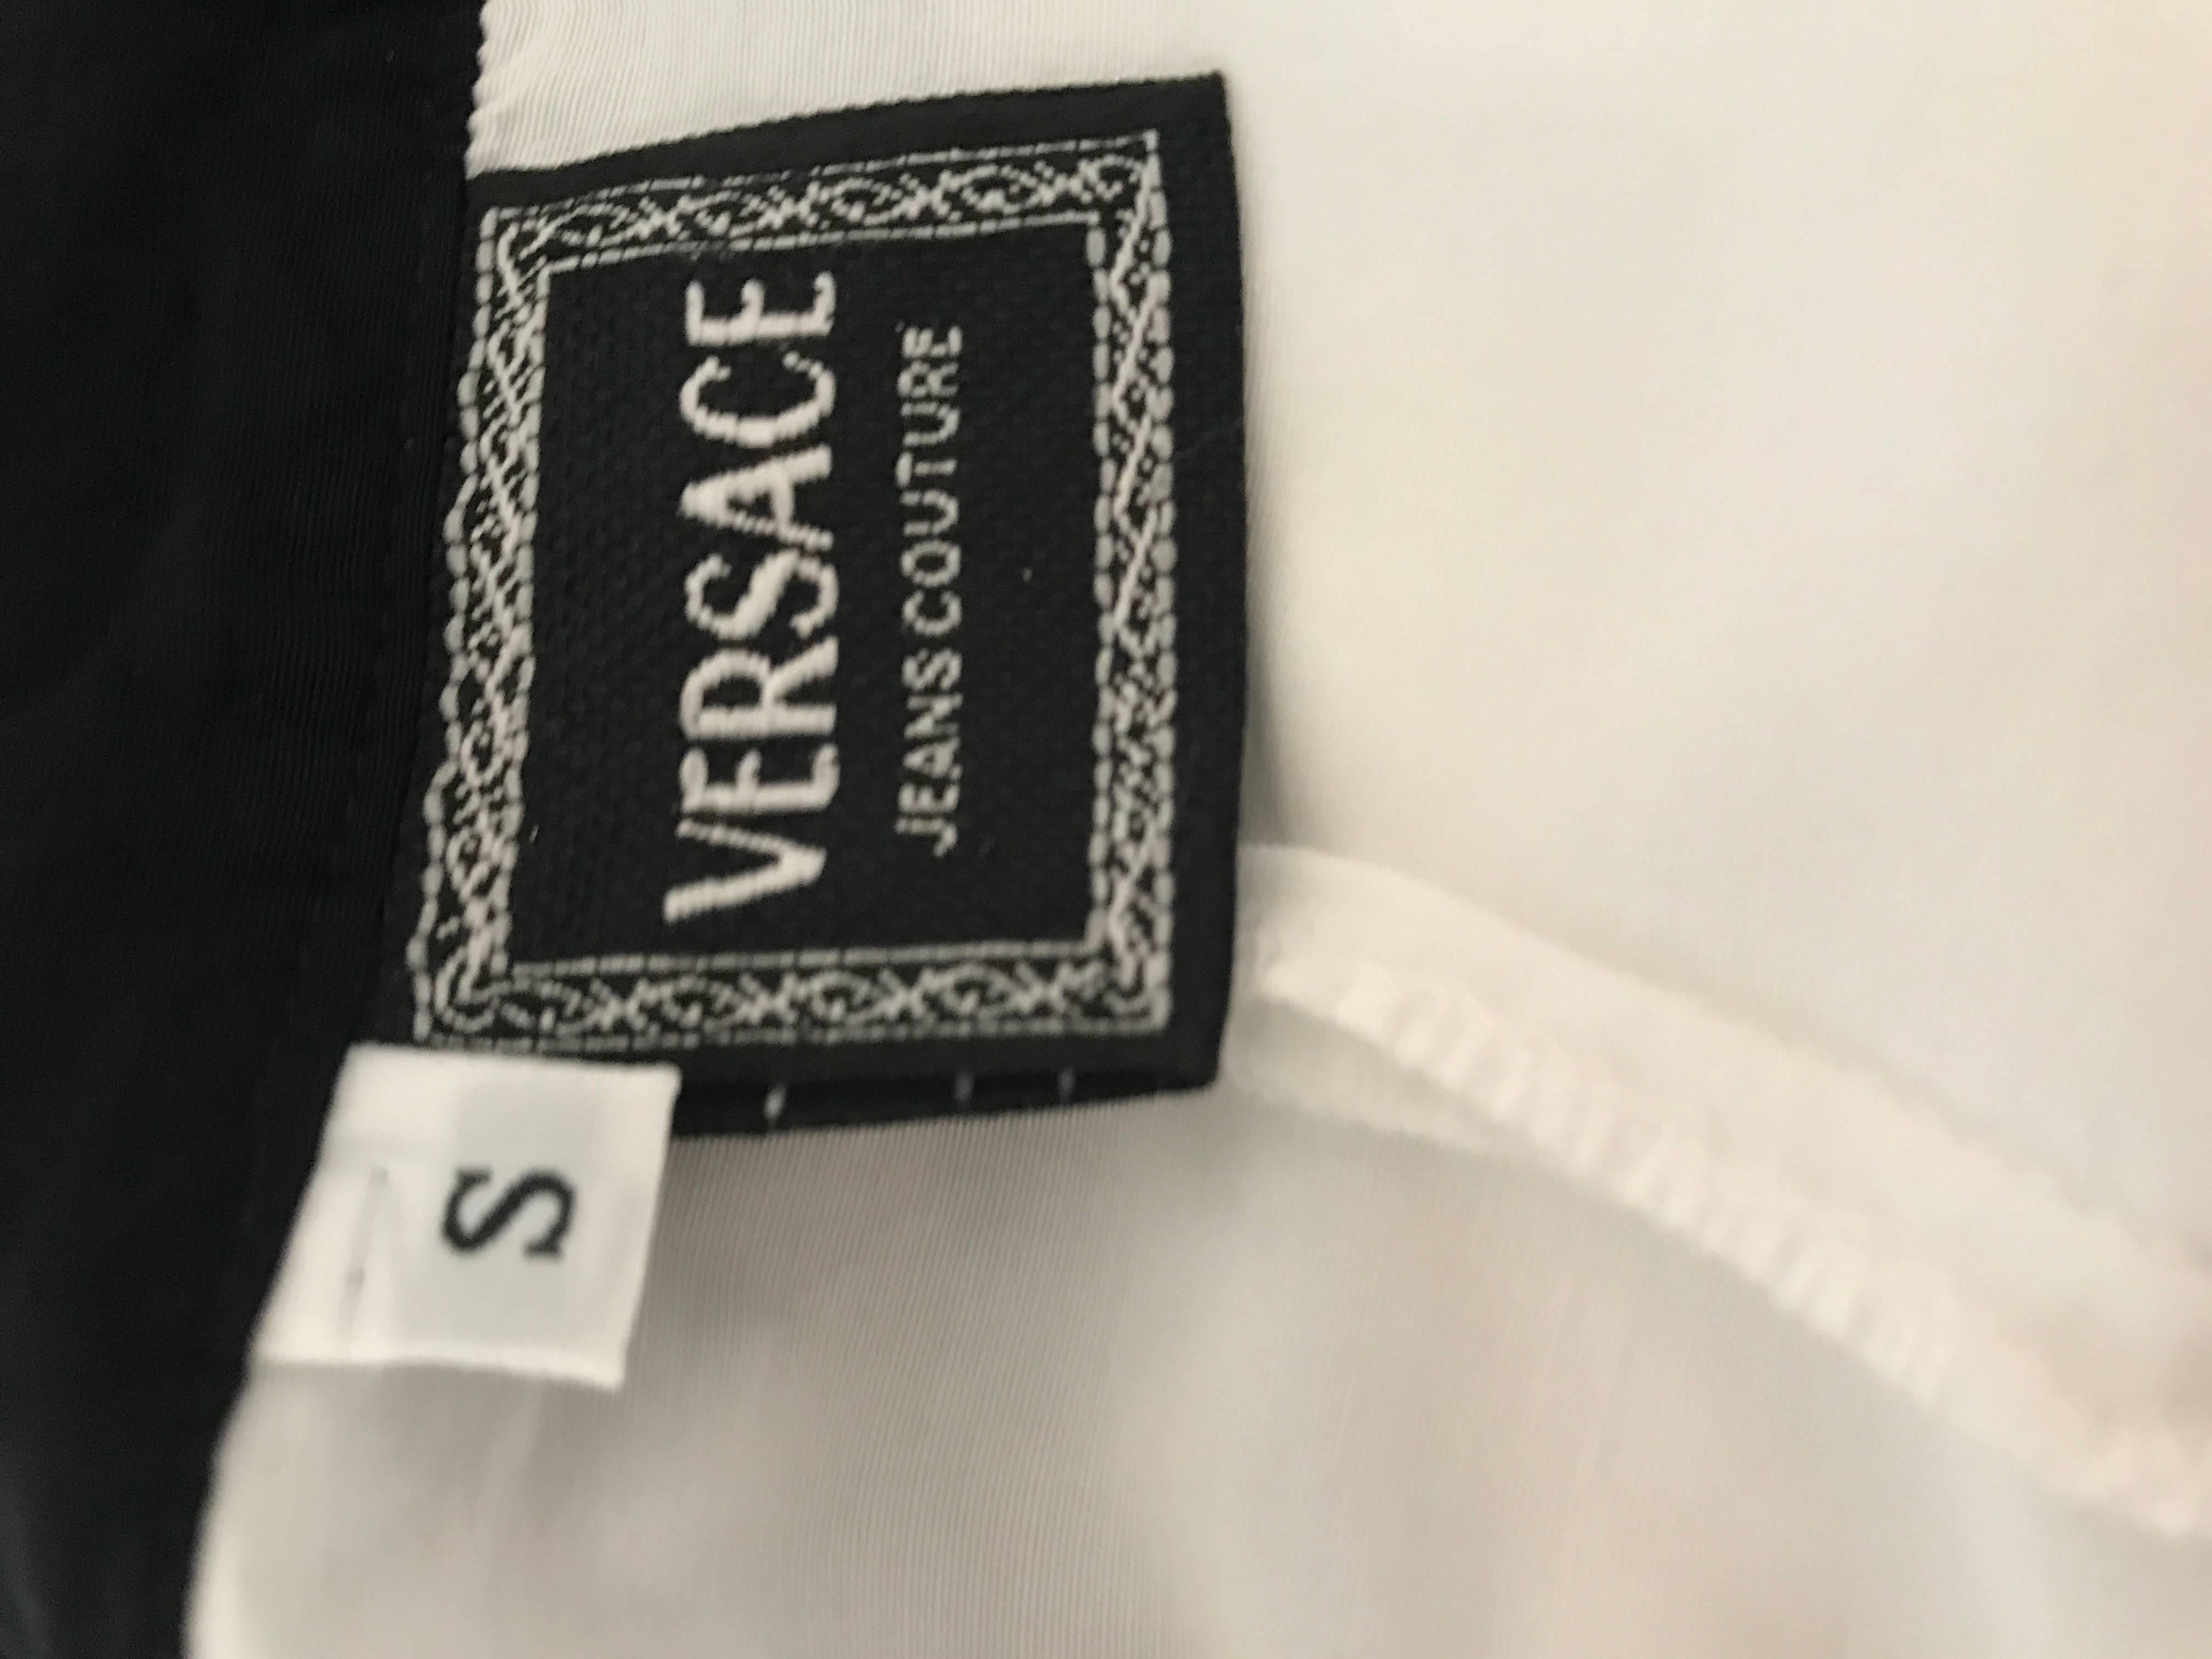 Rare 1990s GIANNI VERSACE black and white long sleeve fitted rayon and silk blended shirt! Features a sleek tailored fit. Long fitted sleeves, with flamenco style cuffs, which are layers of black and white polka dots, gingham plaid, and pindot